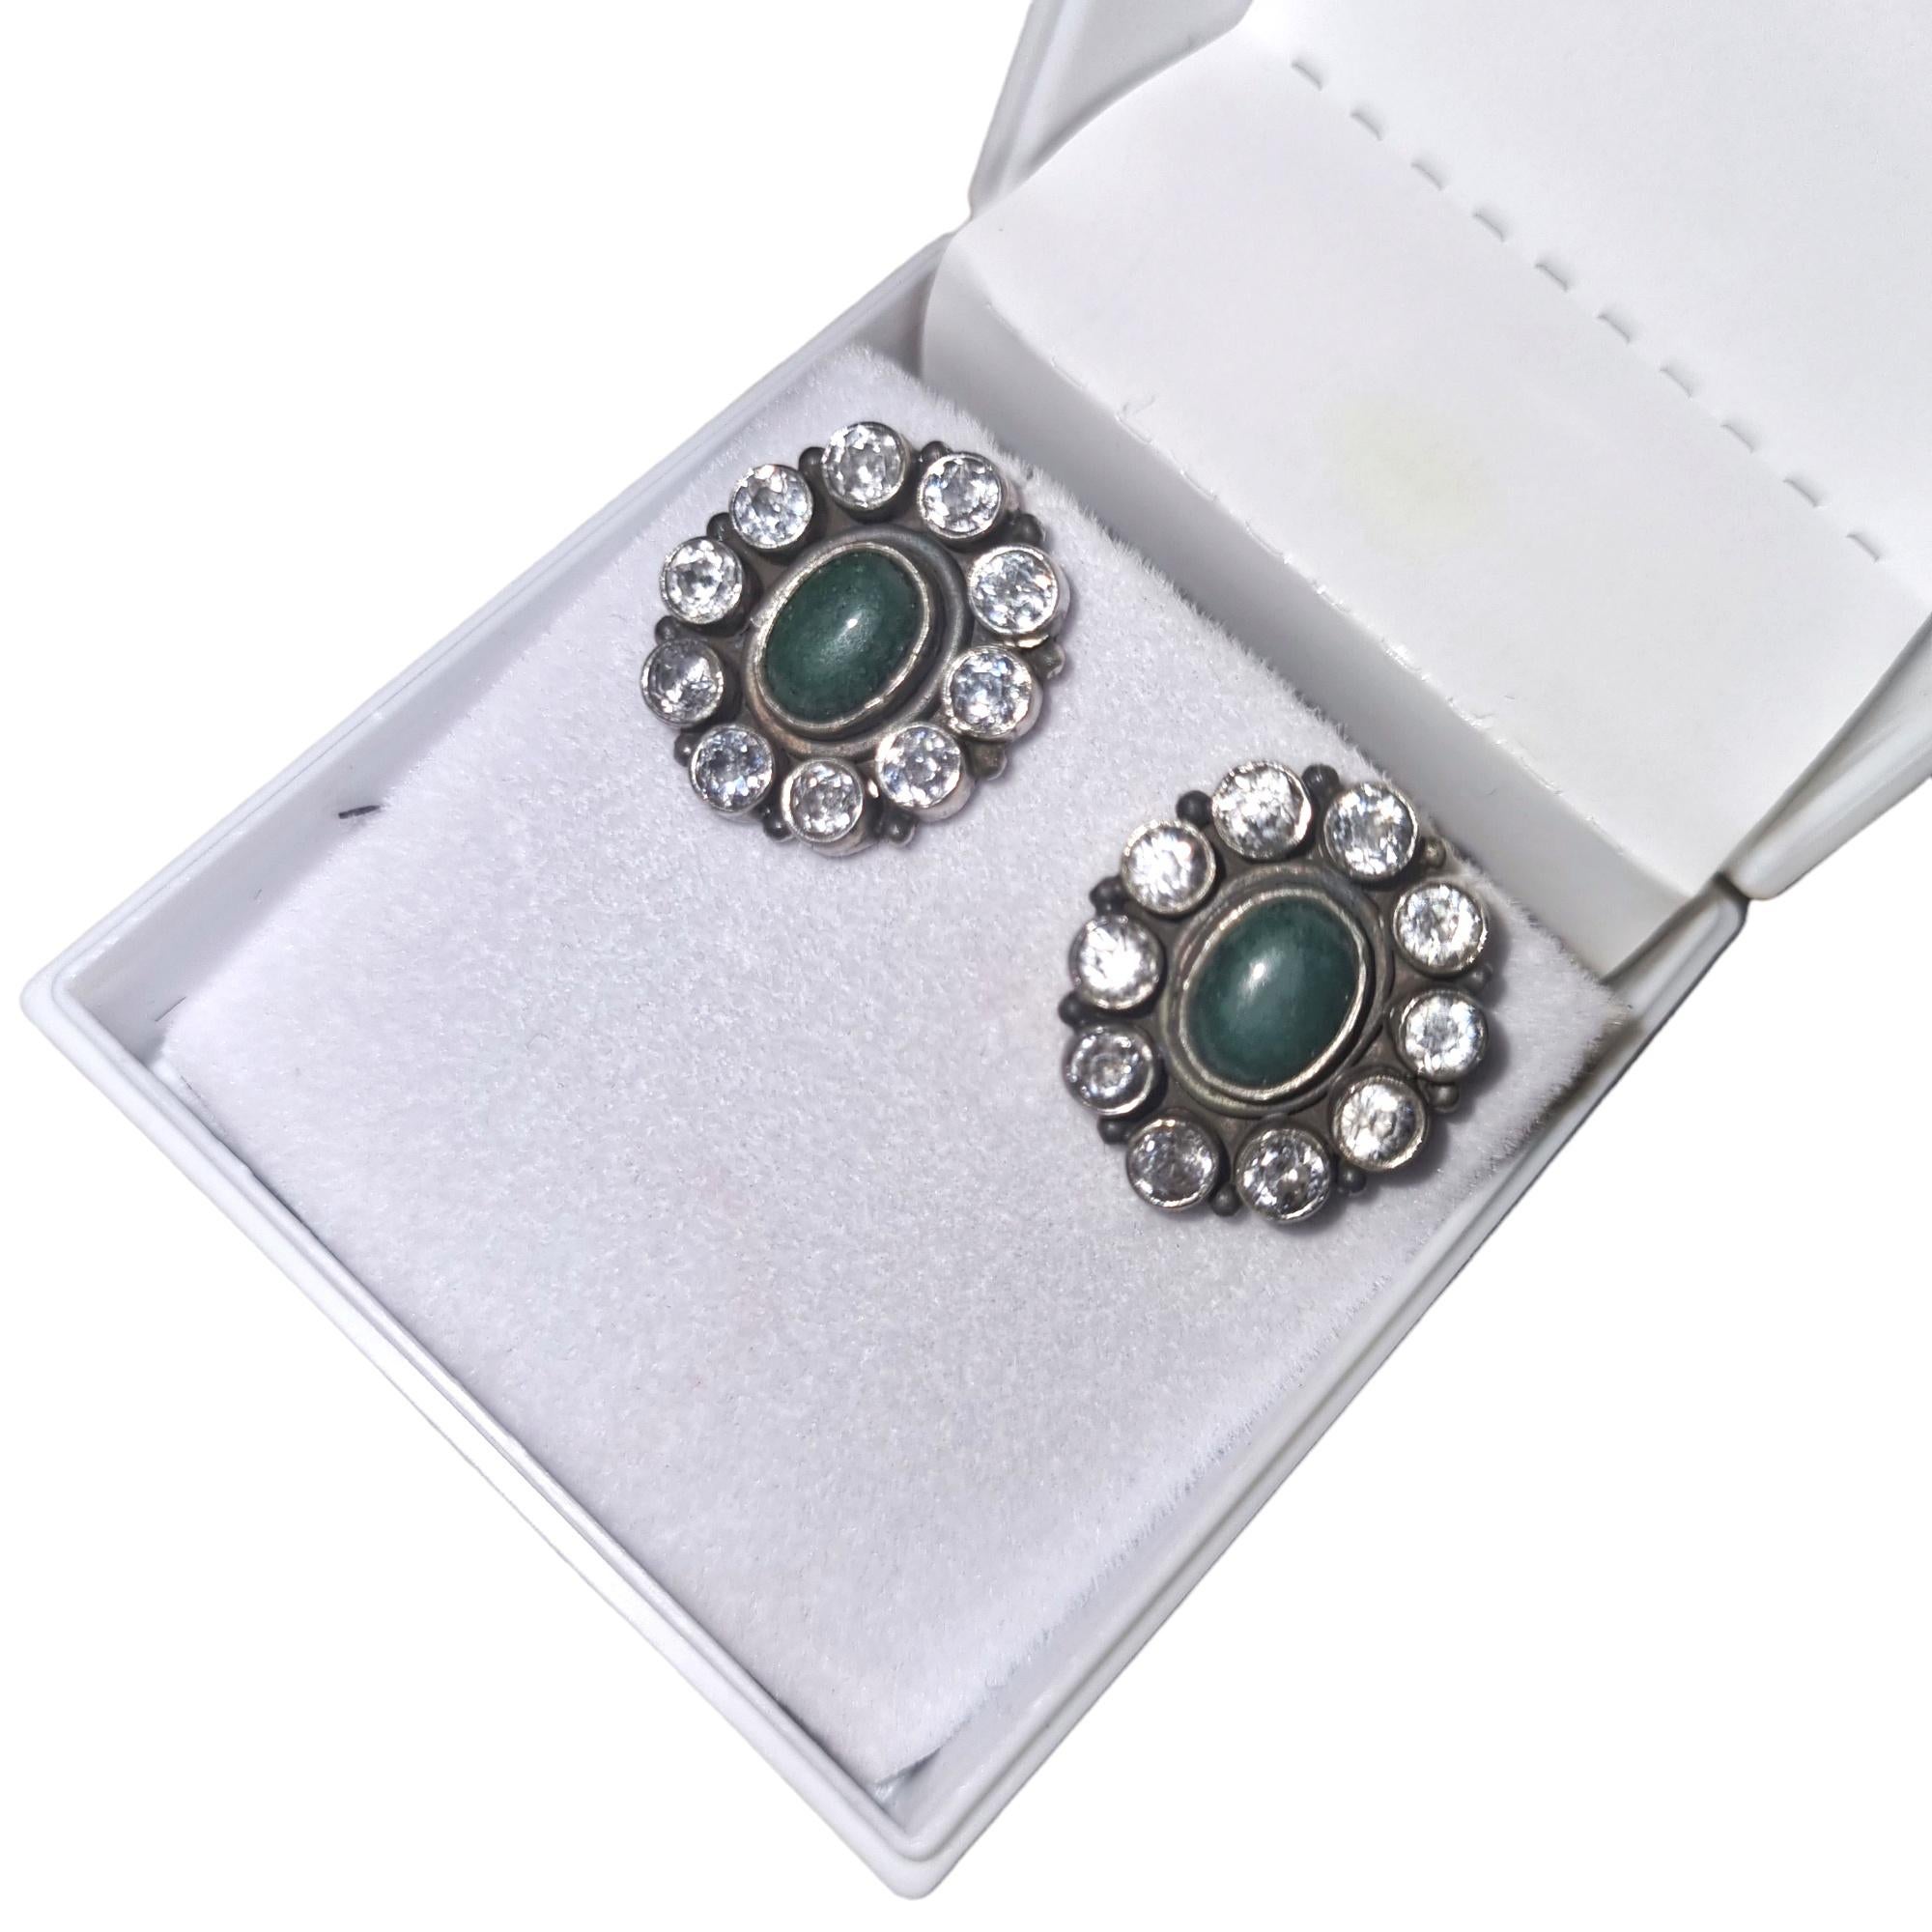 Metal - Sterling silver
Gross Weight - 7.40 Grams
Gemstones - Natural Green Onyx
Gemstone shape - Oval
Diamonds - Cubic Zirconia

Halo stud earrings with an oval-cut green onyx center stone and round cubic zirconia diamonds surrounding it are a